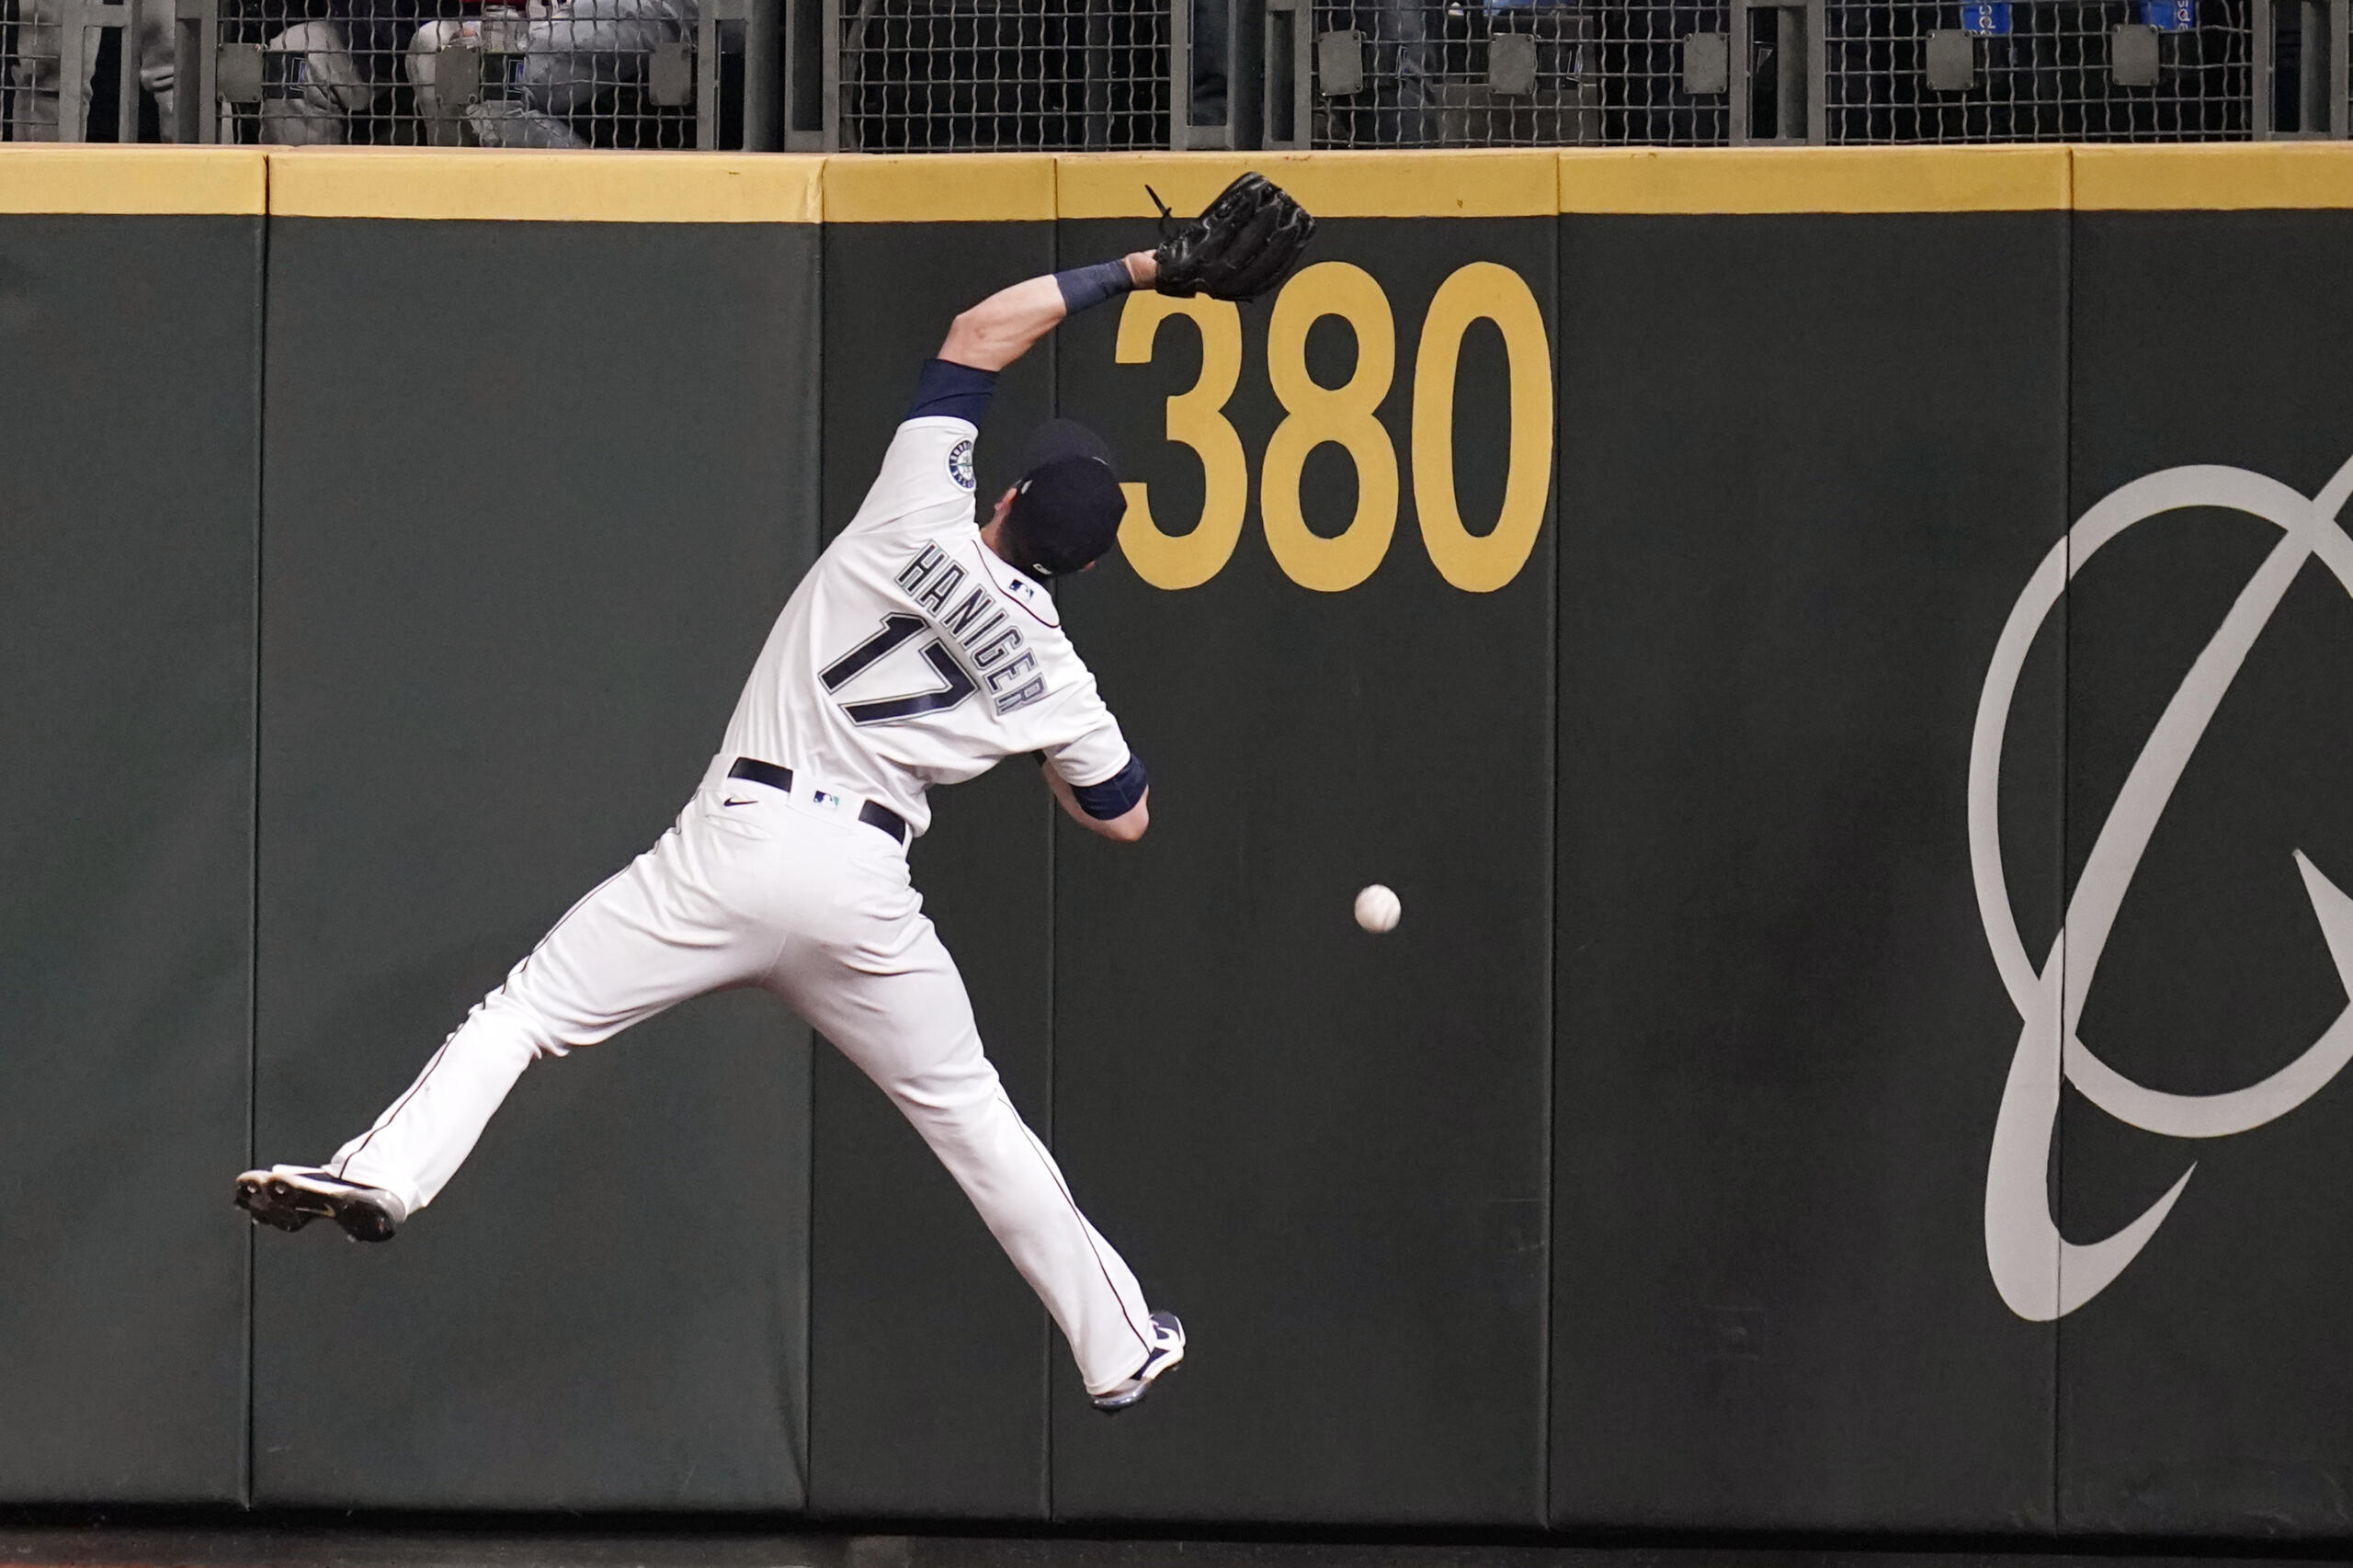 Seattle Mariners right fielder Mitch Haniger can't catch a deep fly ball that fell in for a triple by Boston Red Sox's Xander Bogaerts during the eighth inning of a baseball game Tuesday, Sept. 14, 2021, in Seattle.